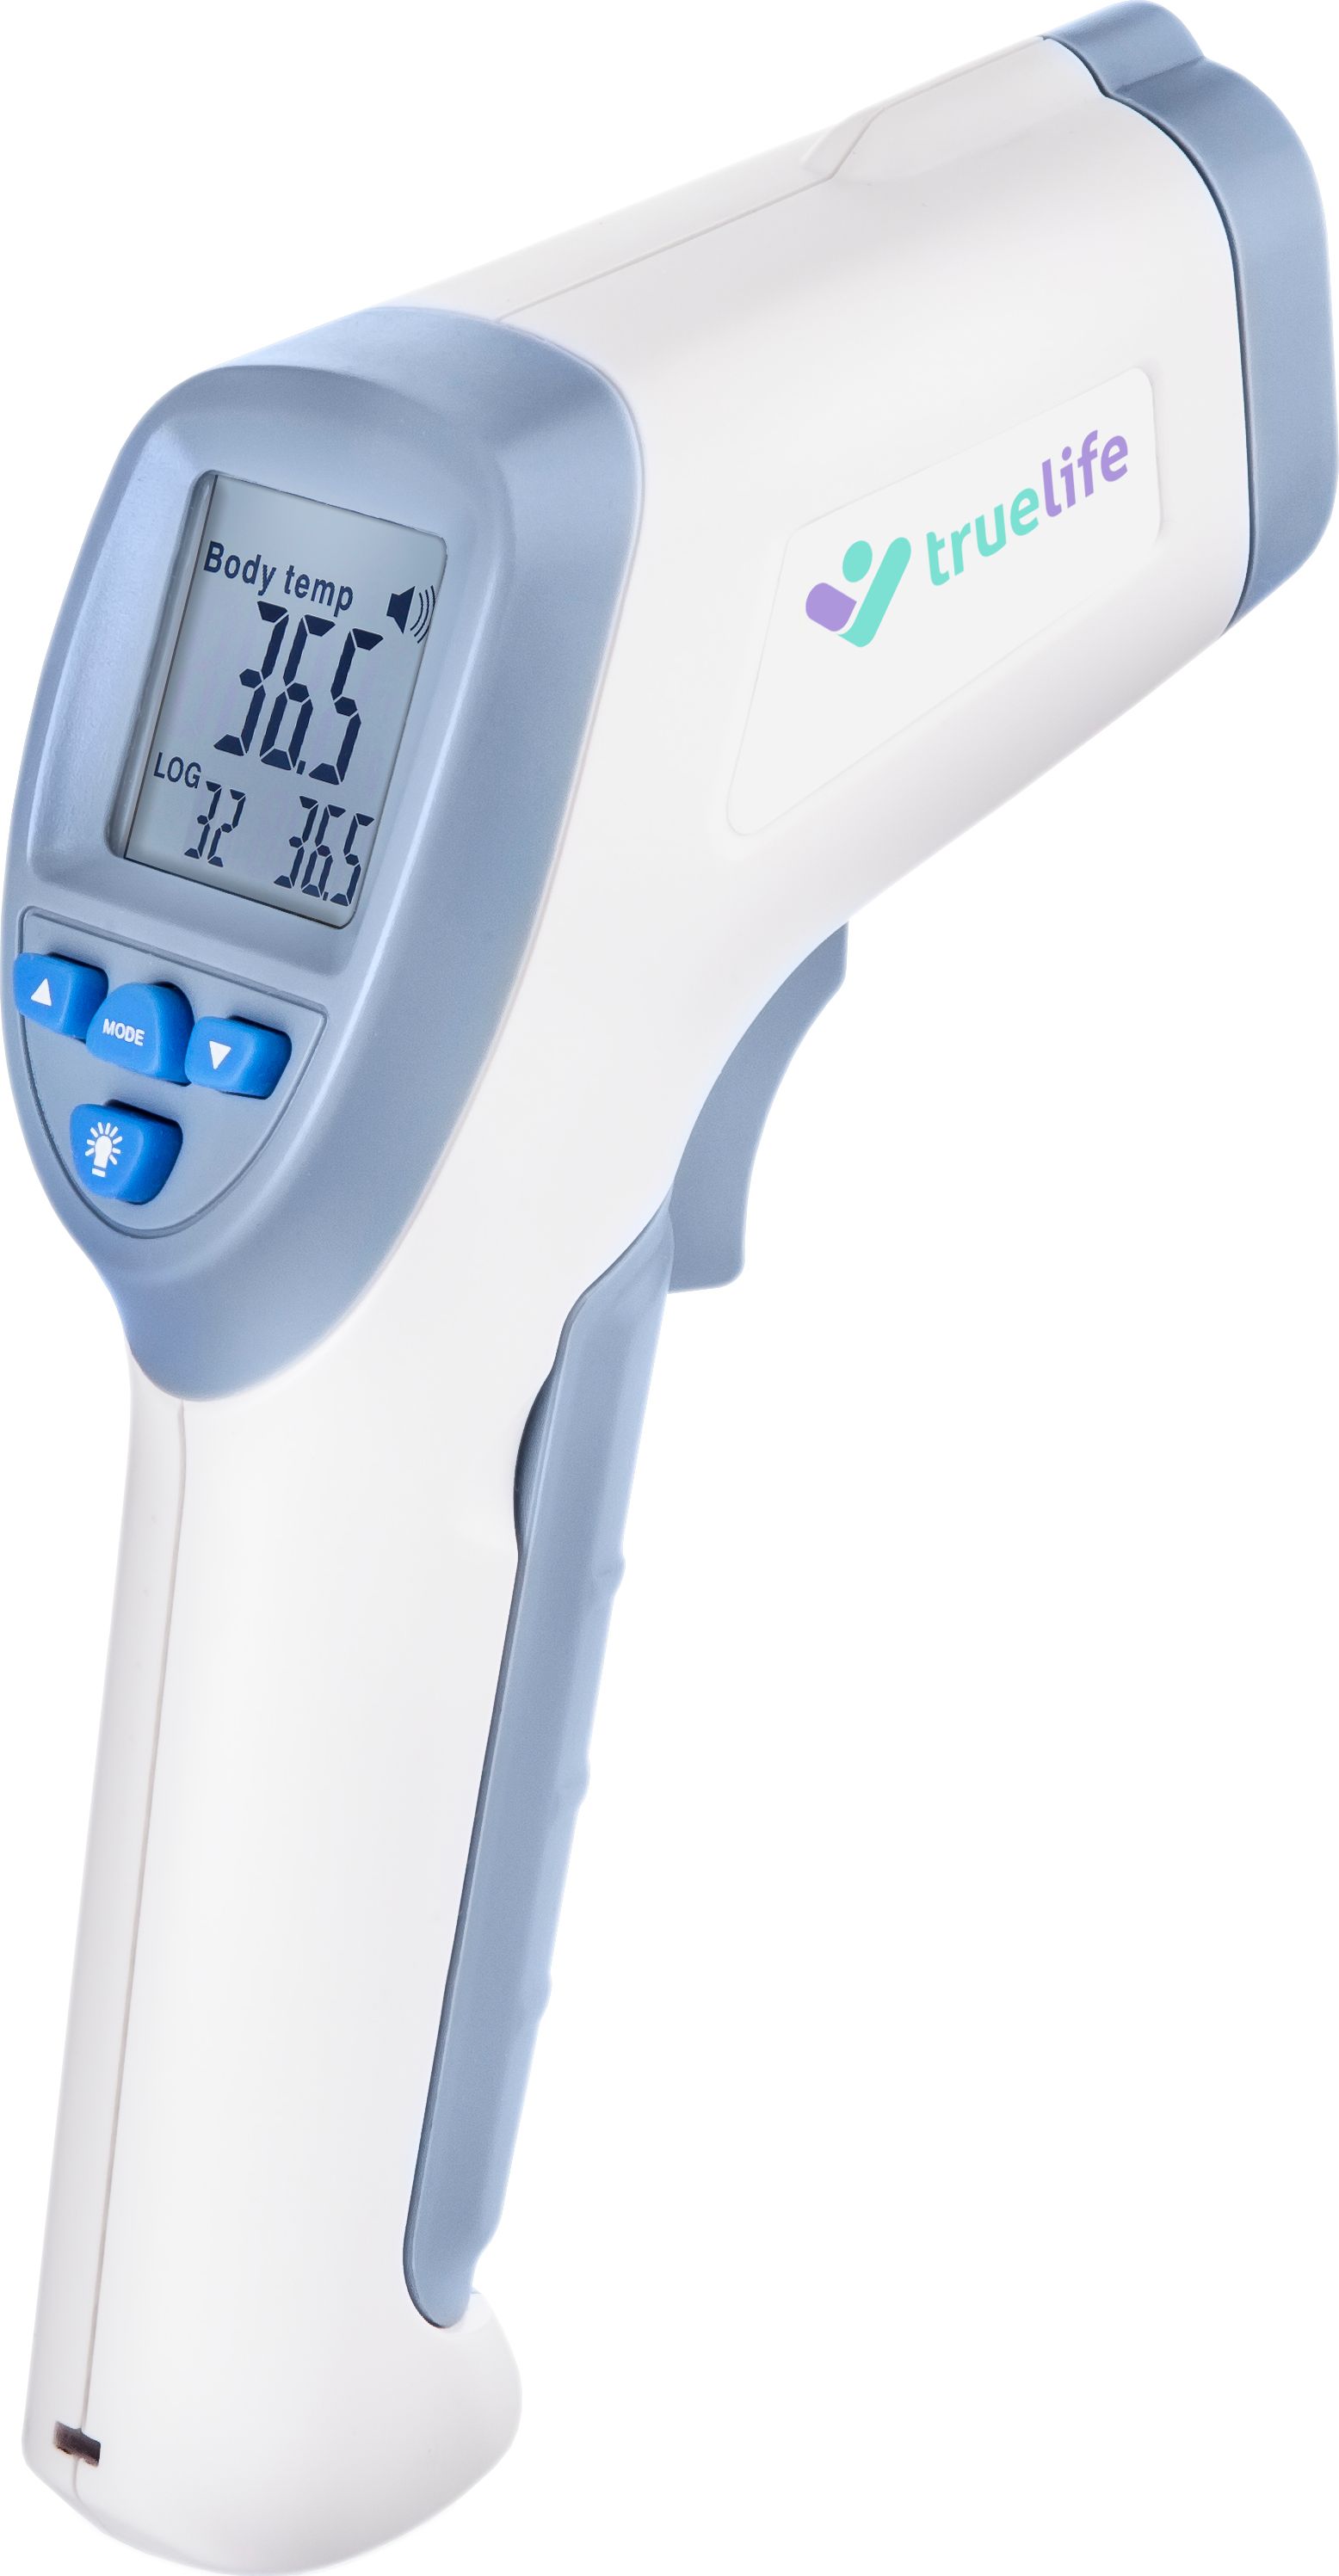 TrueLife CAREQ7BLU digital body thermometer Remote sensing thermometer Blue, White Universal Buttons termometrs